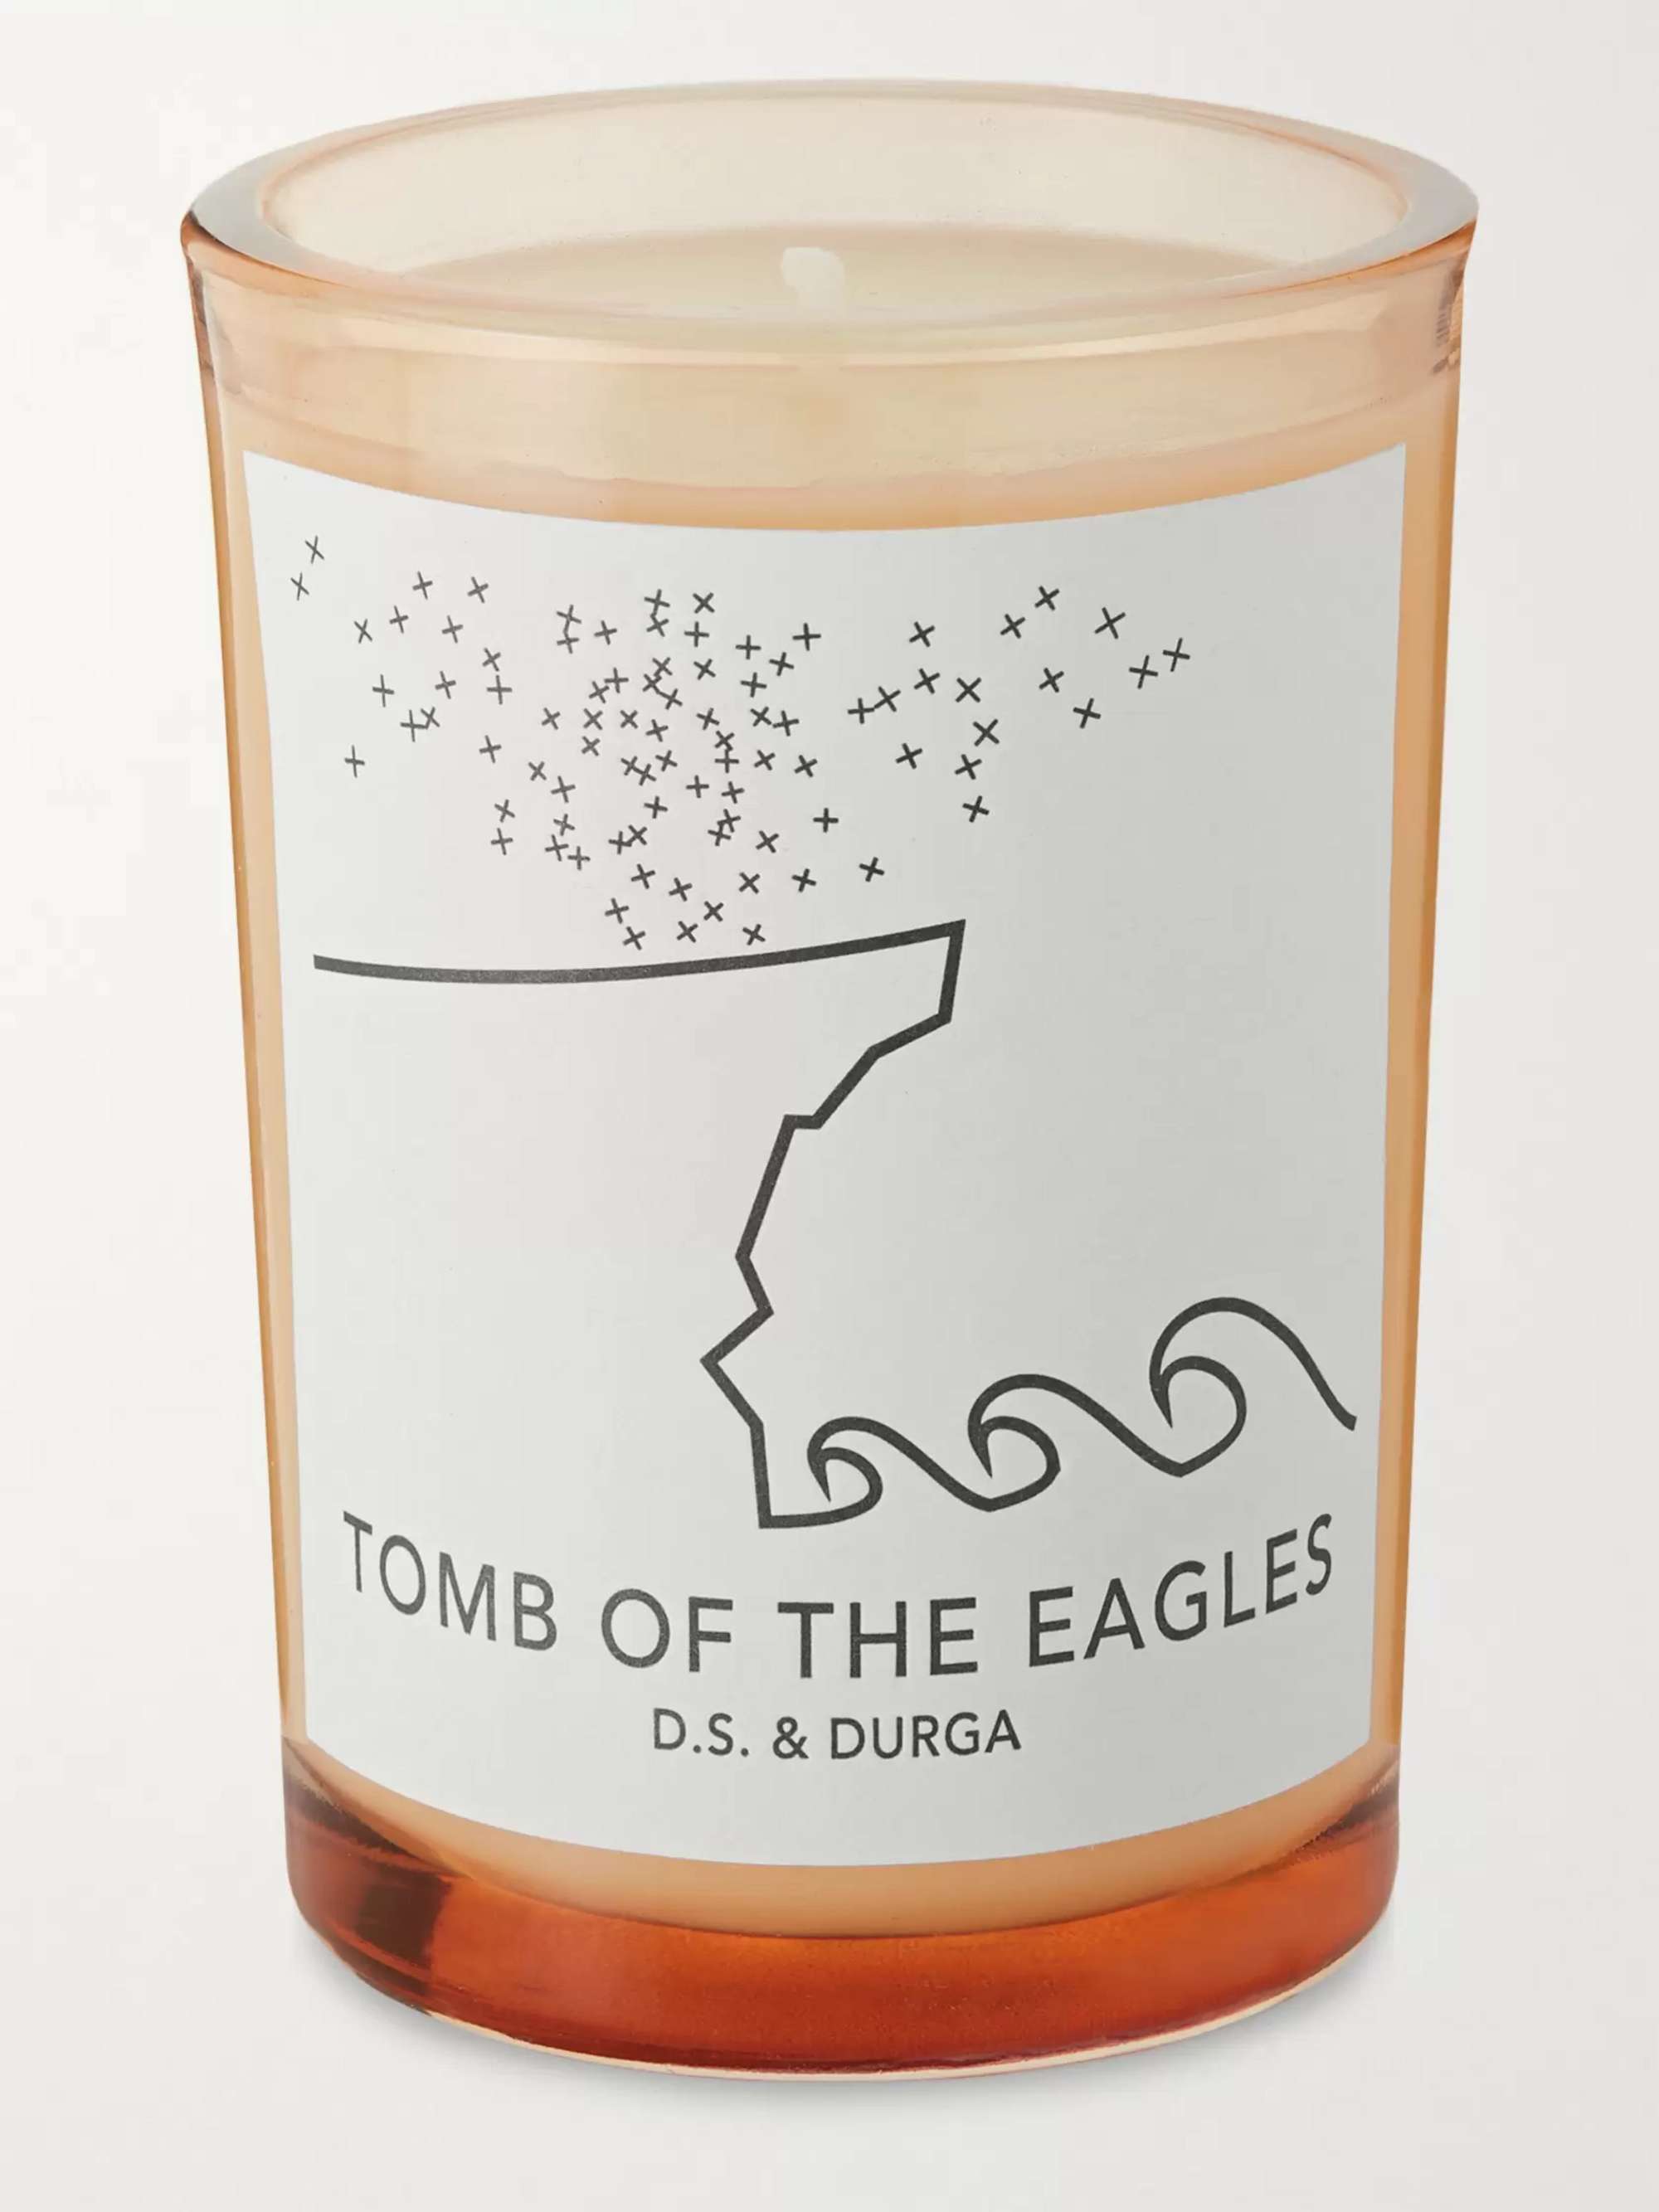 D.S. & DURGA Tomb of the Eagles Scented Candle, 200g